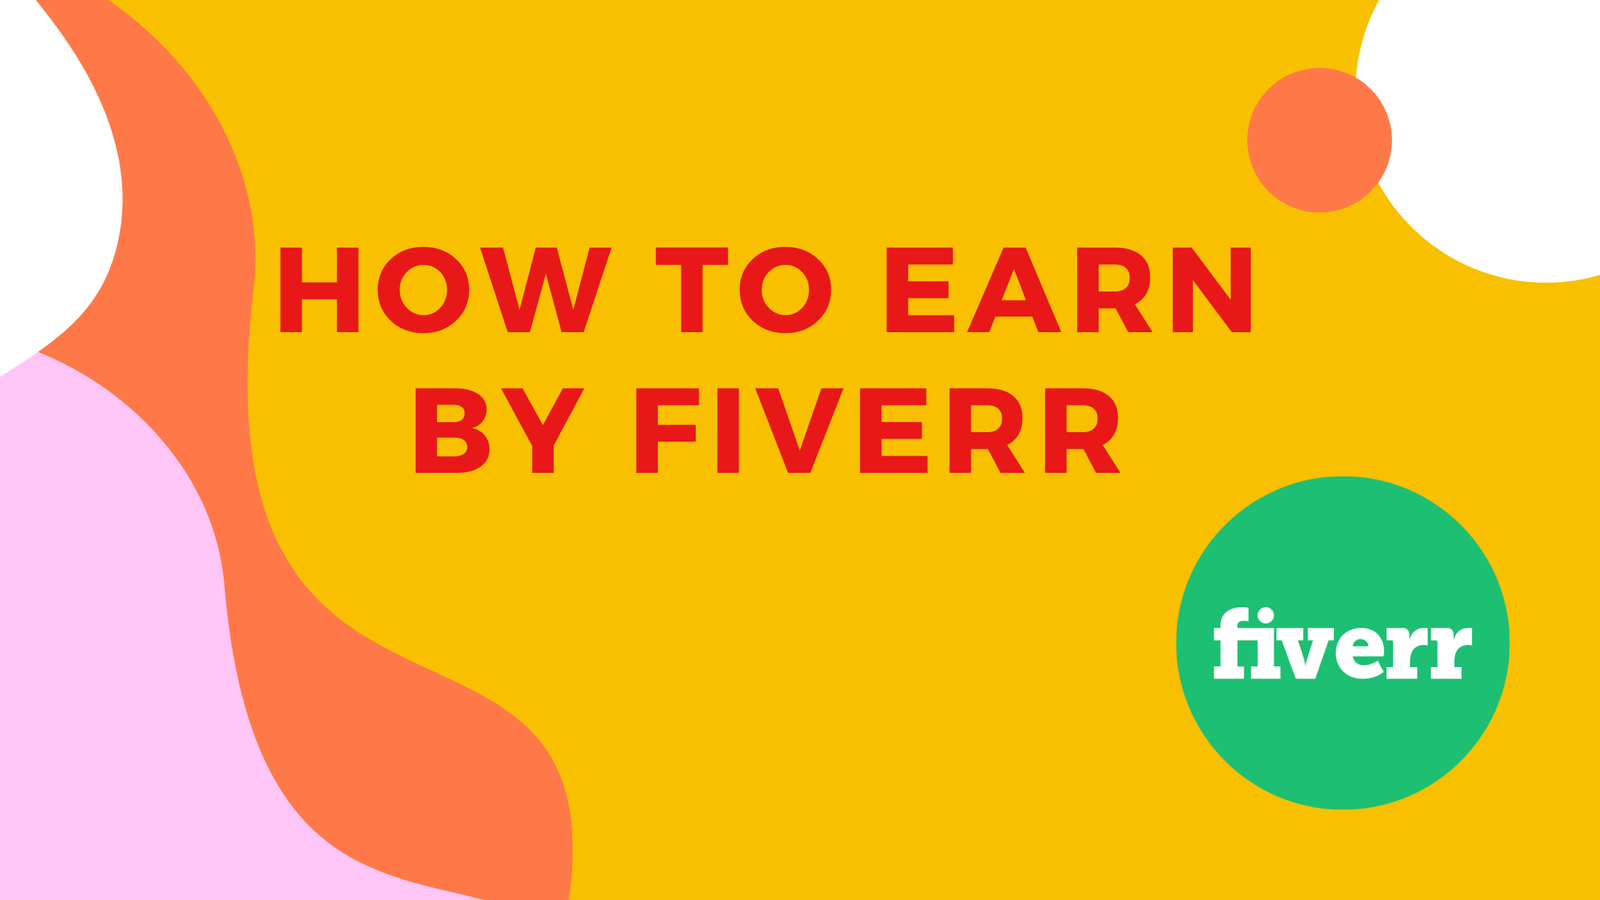 How I earn 550 $ from Fiverr